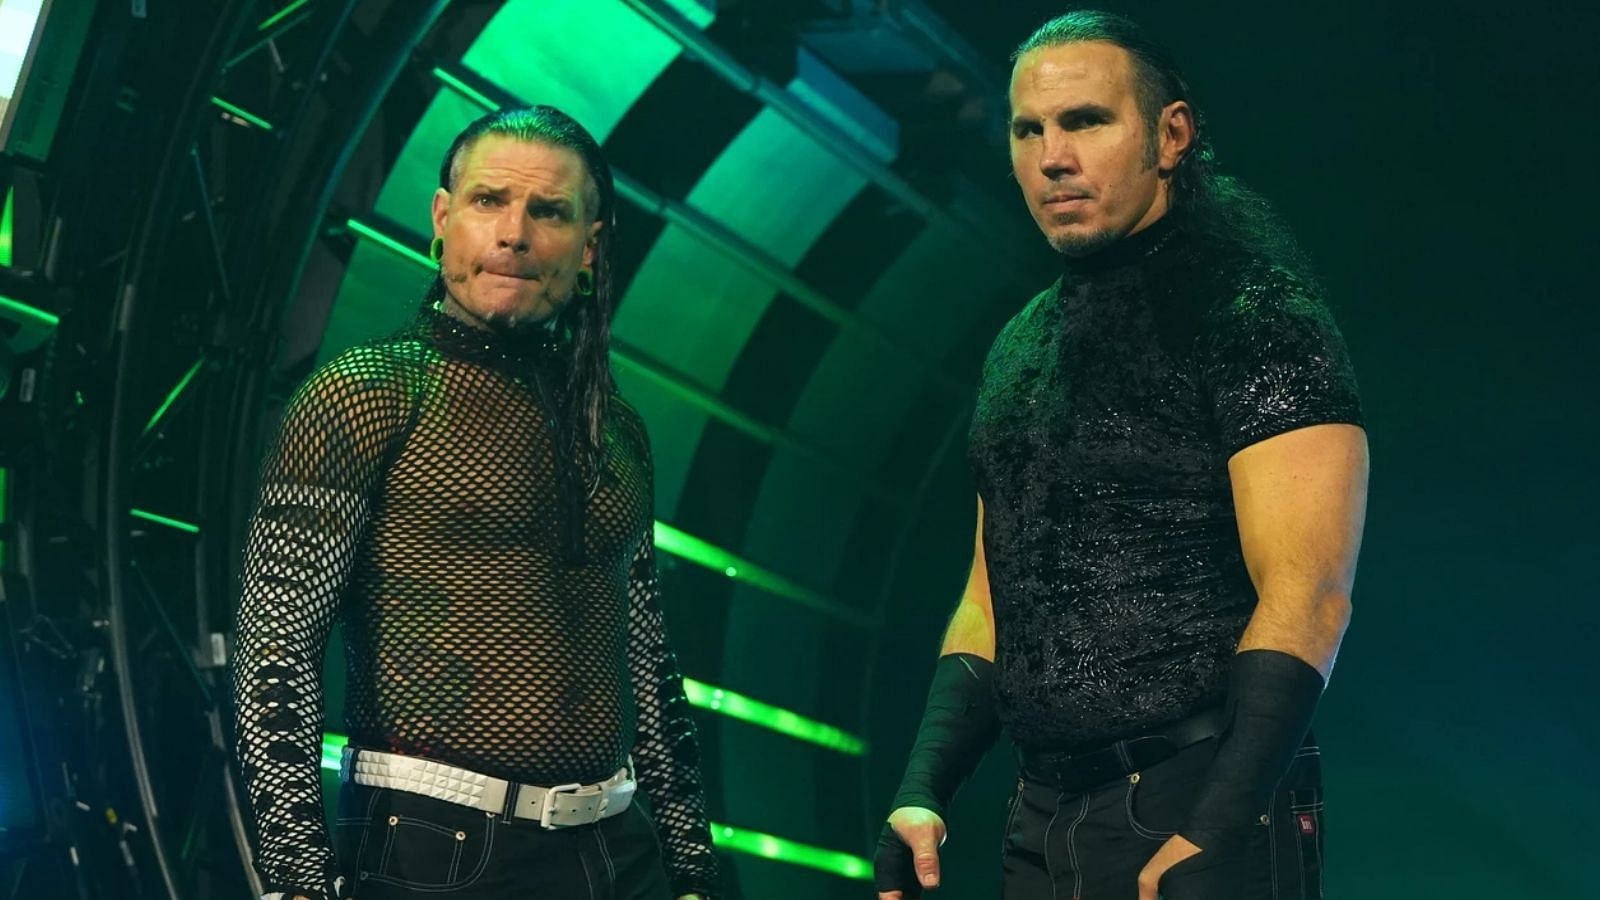 The Hardys are seemingly building up to an explosive run-in AEW